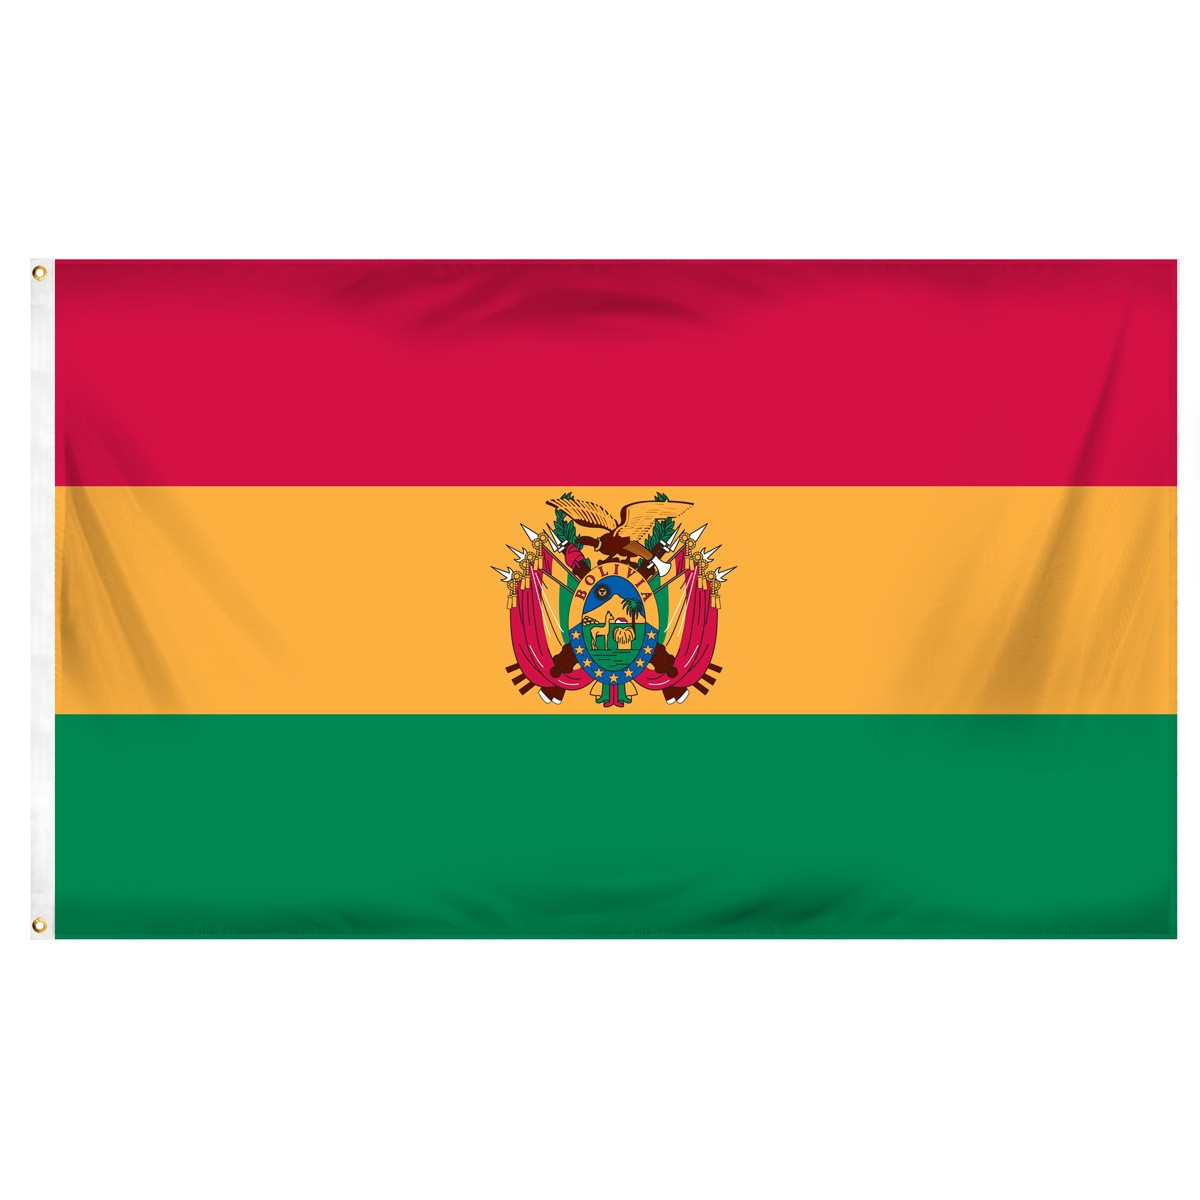 Bolivia Submit Flags and Flags